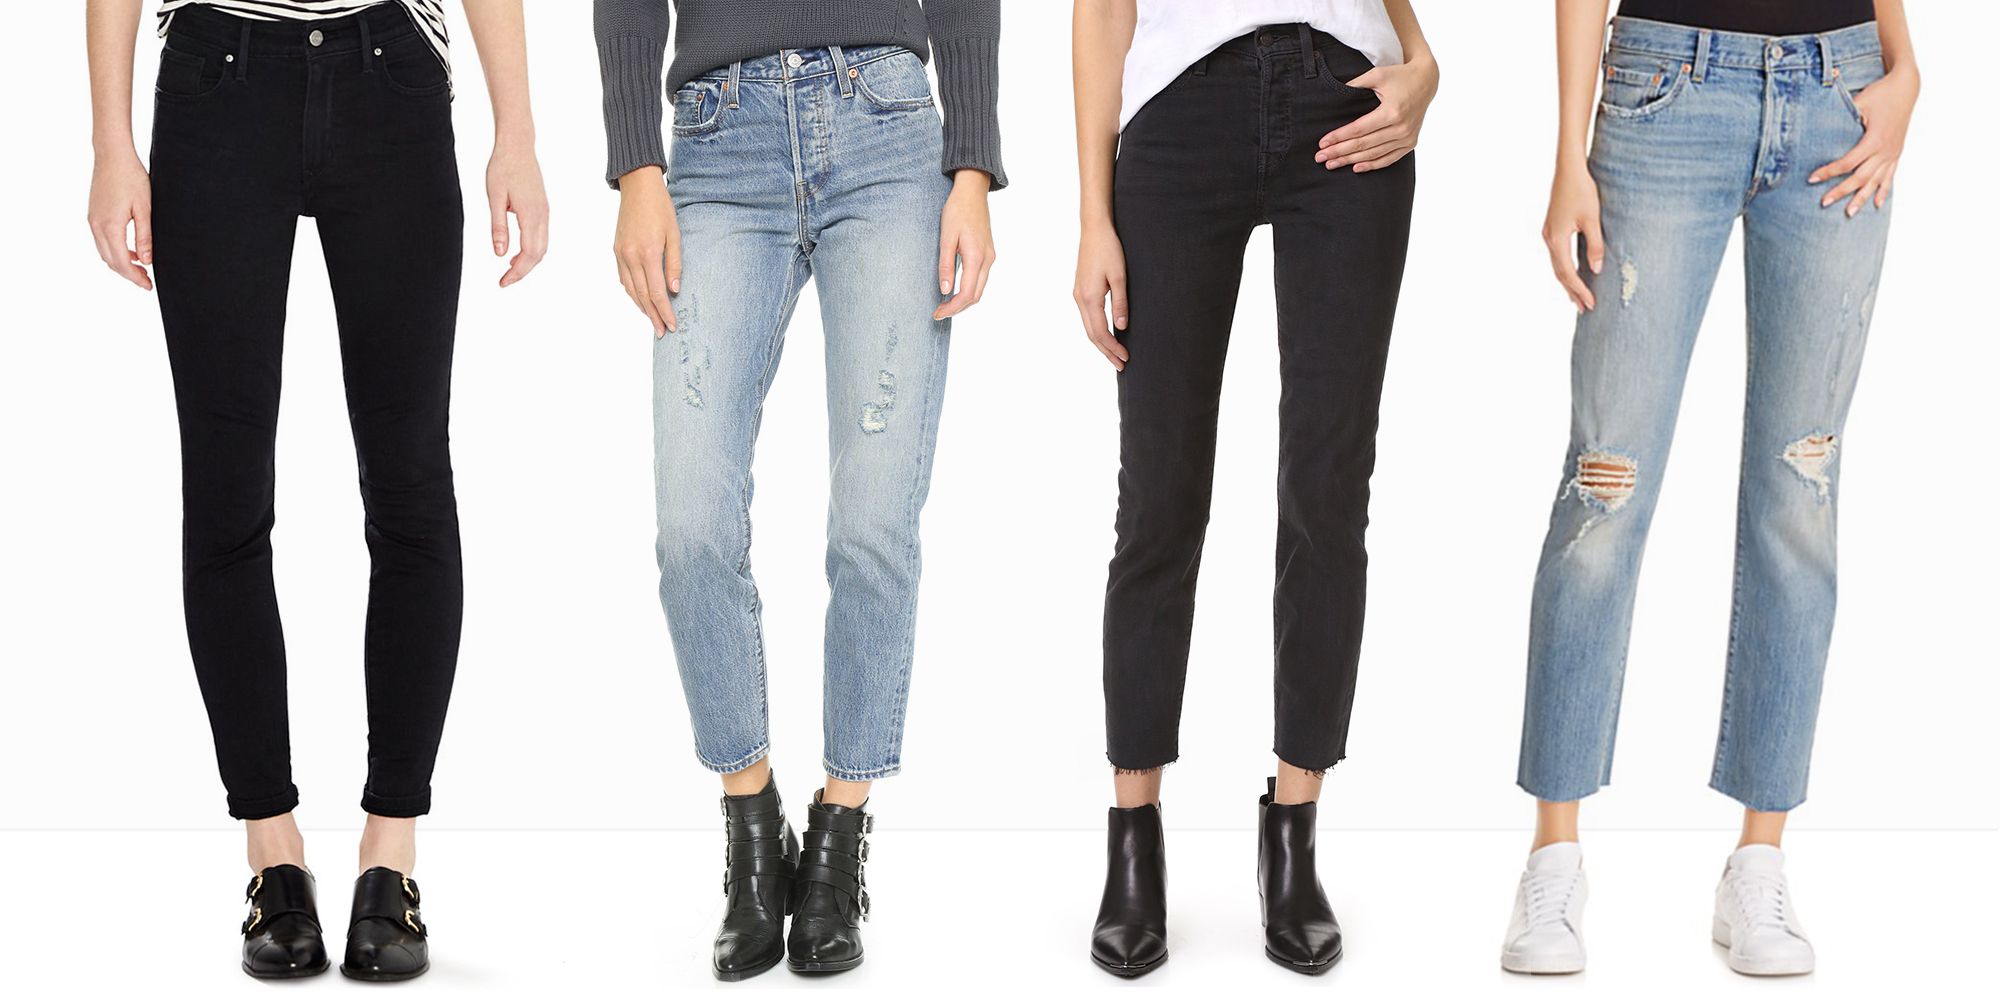 kabine Abe Settlers 10 Best Levi's Jeans to Shop Now 2018 - High Rise, Distressed, & Skinny  Blue Levis Jeans